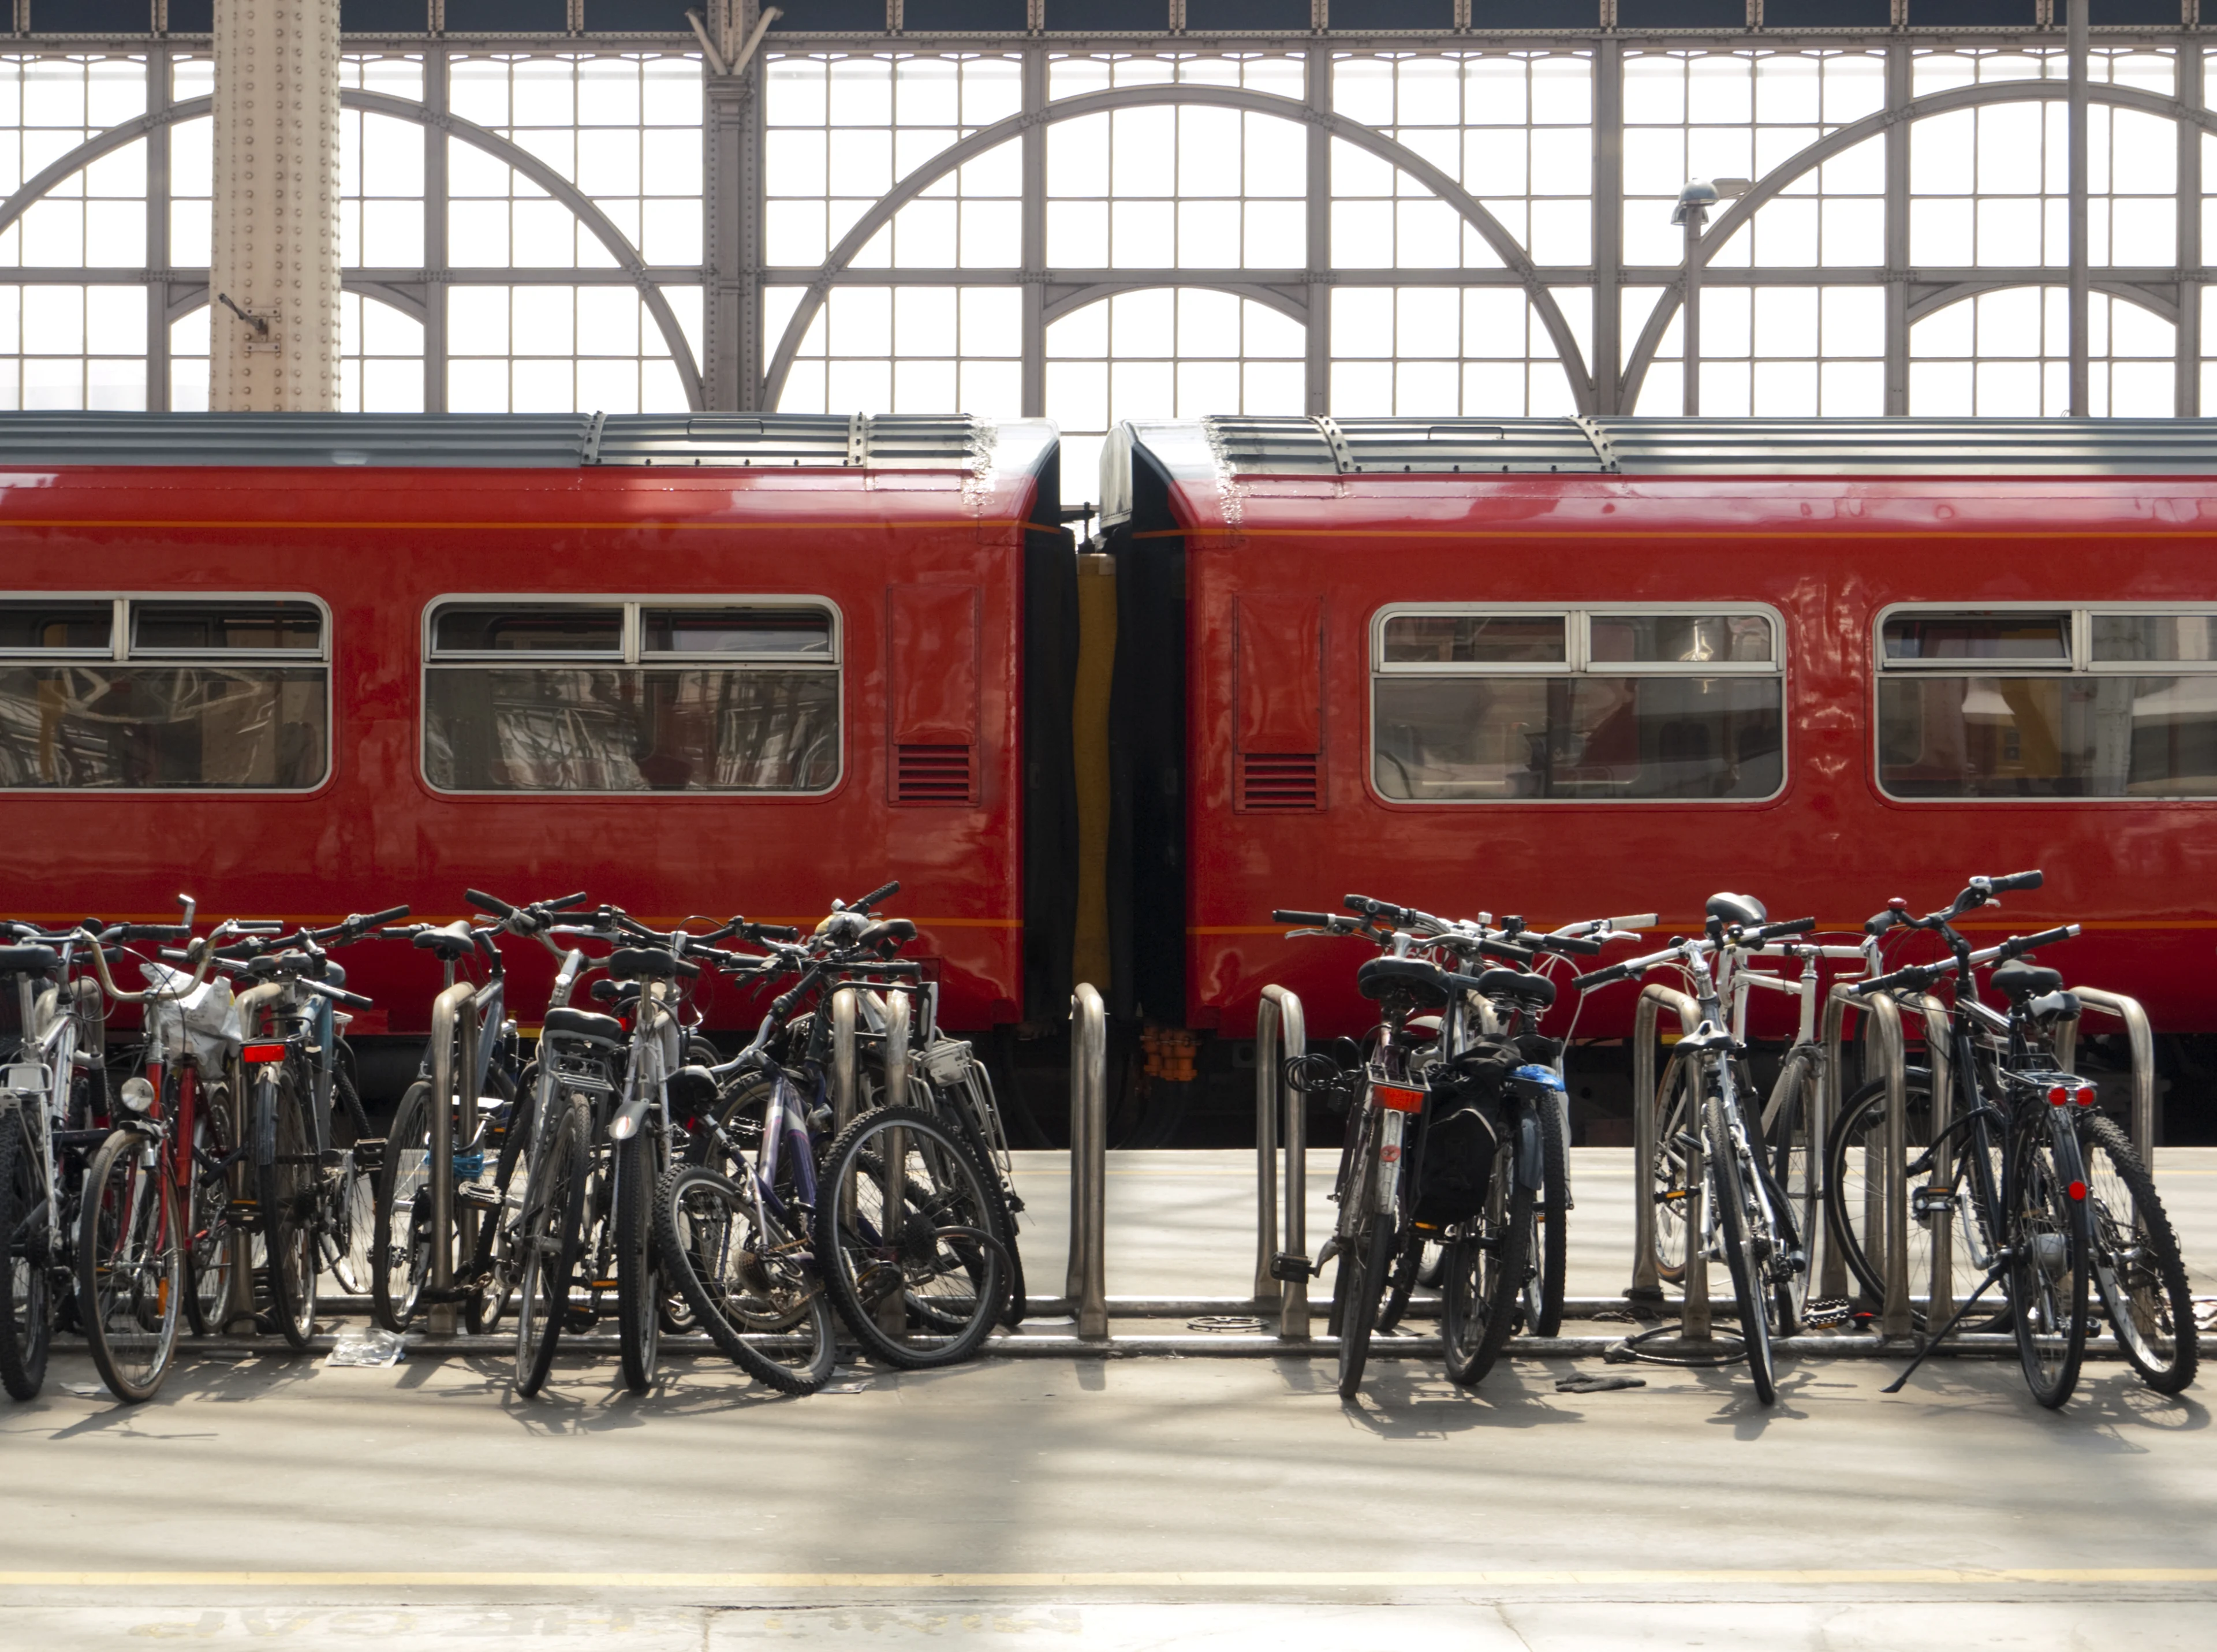 Bicycles parked at a station with a train behind them at a platform and arched windows in the background